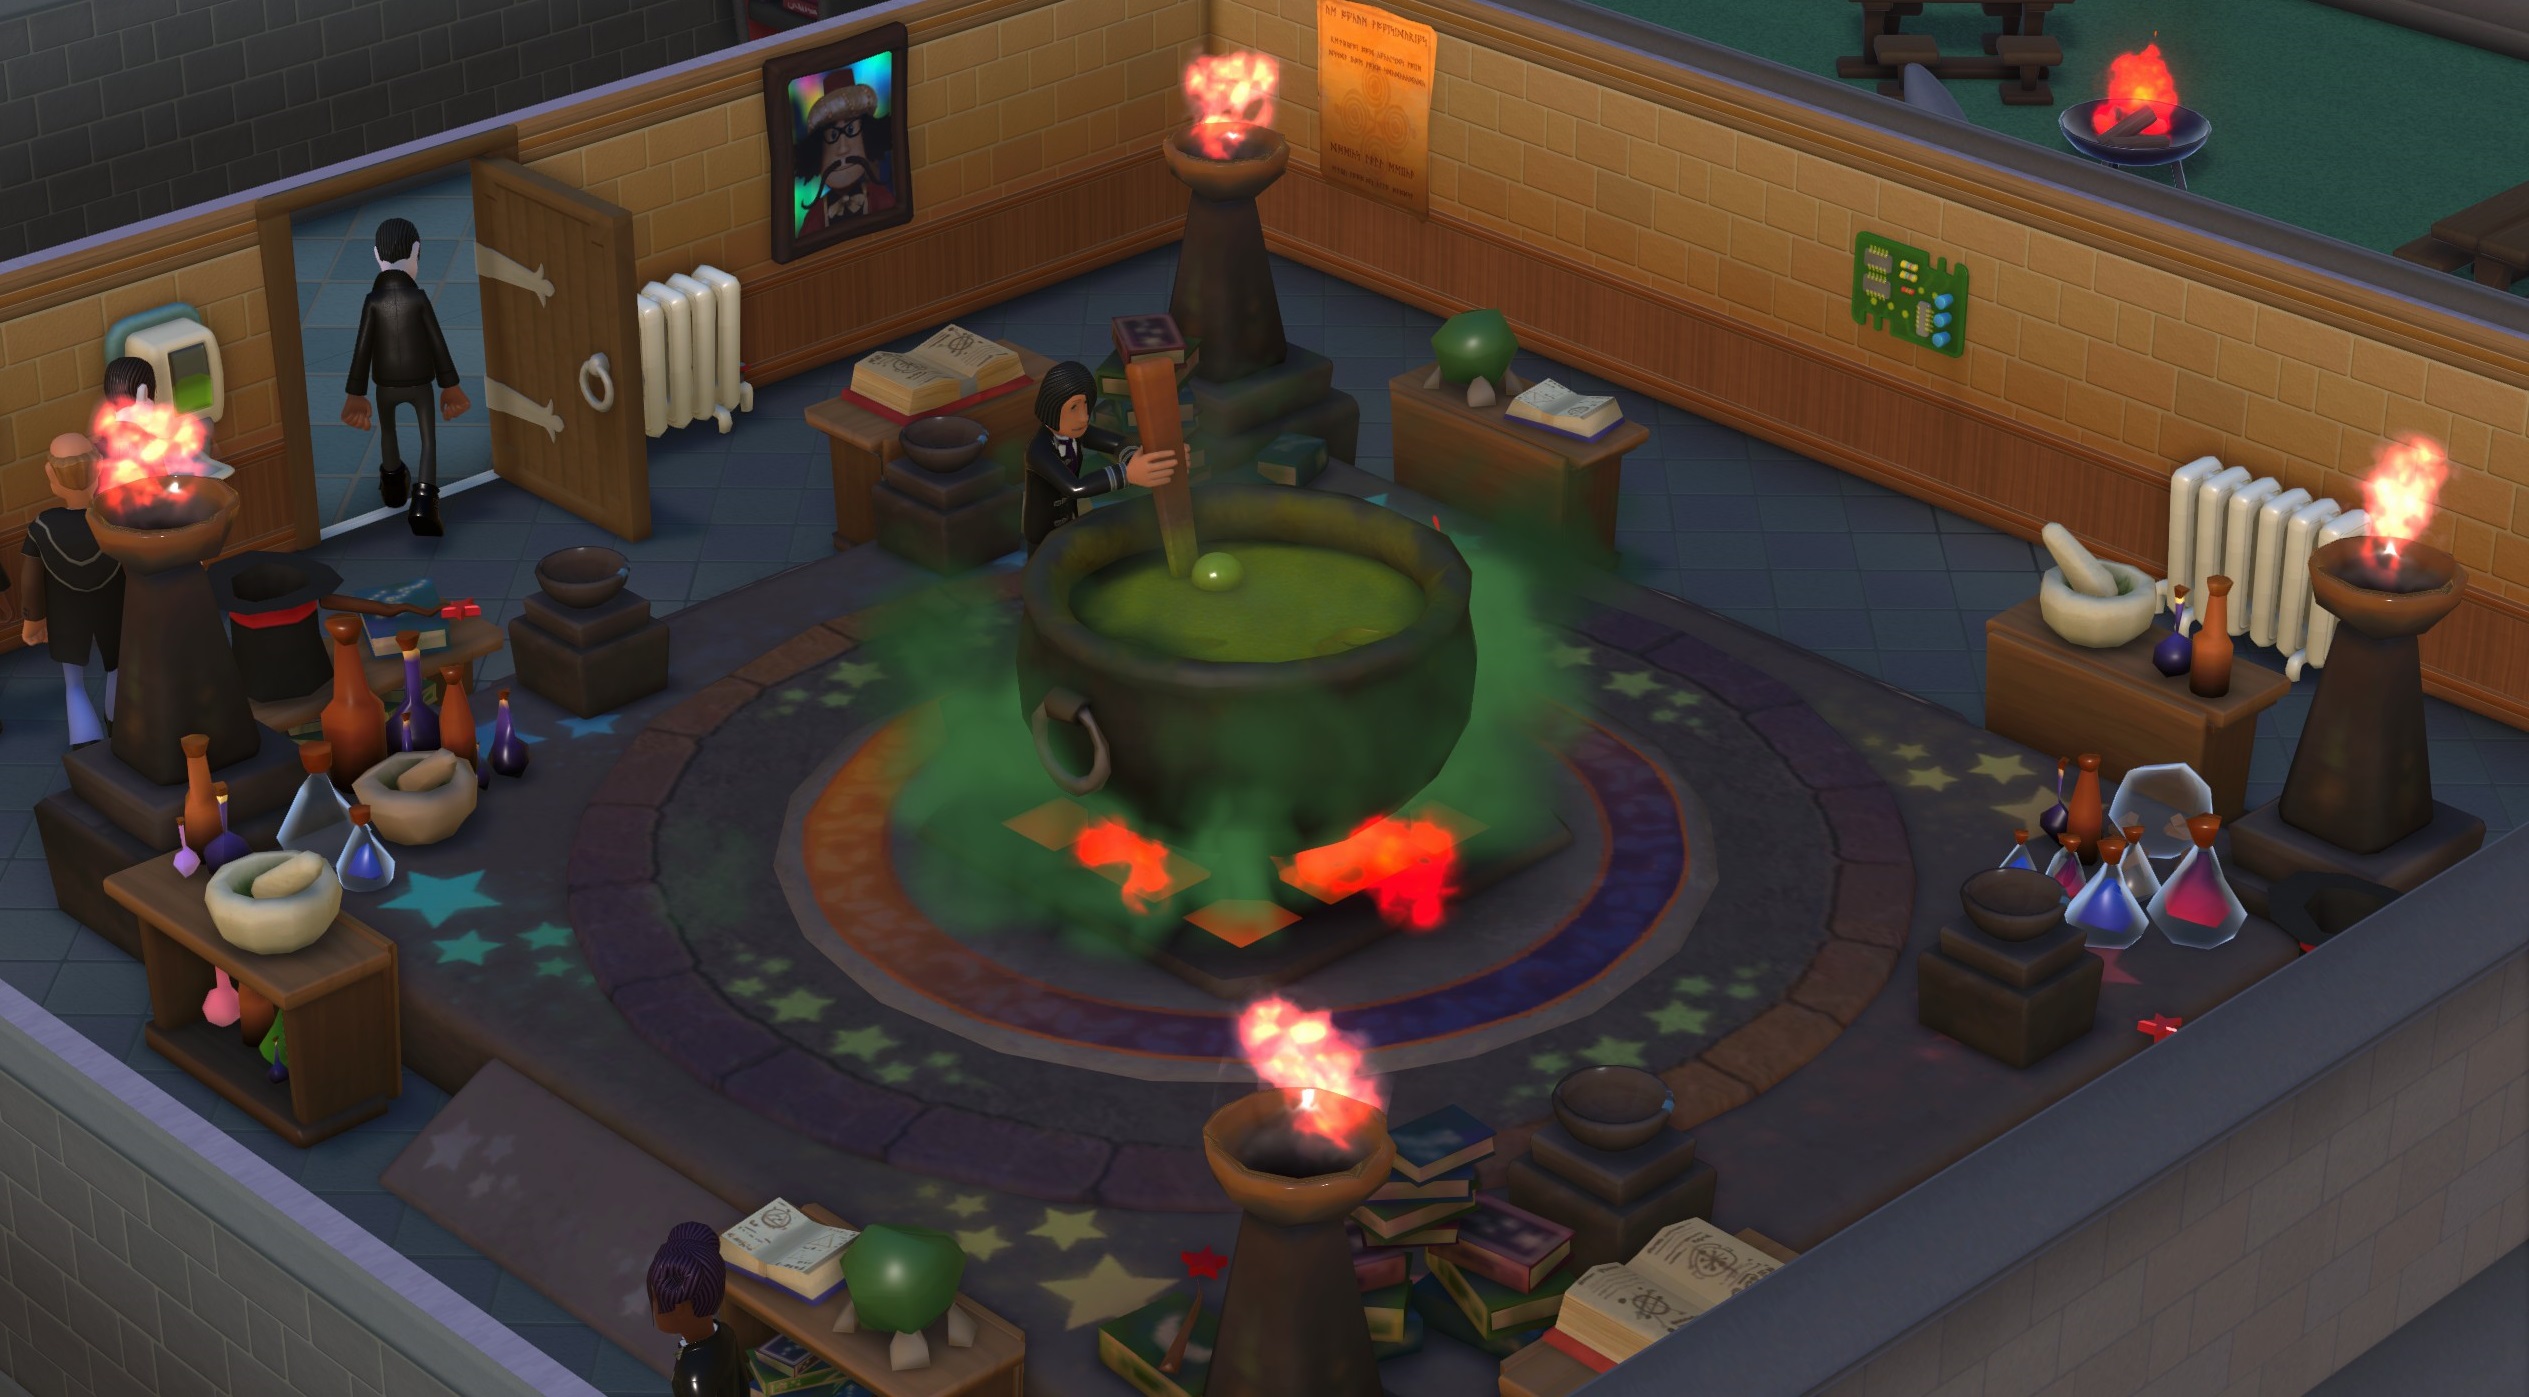 Wizardry students using a cauldron